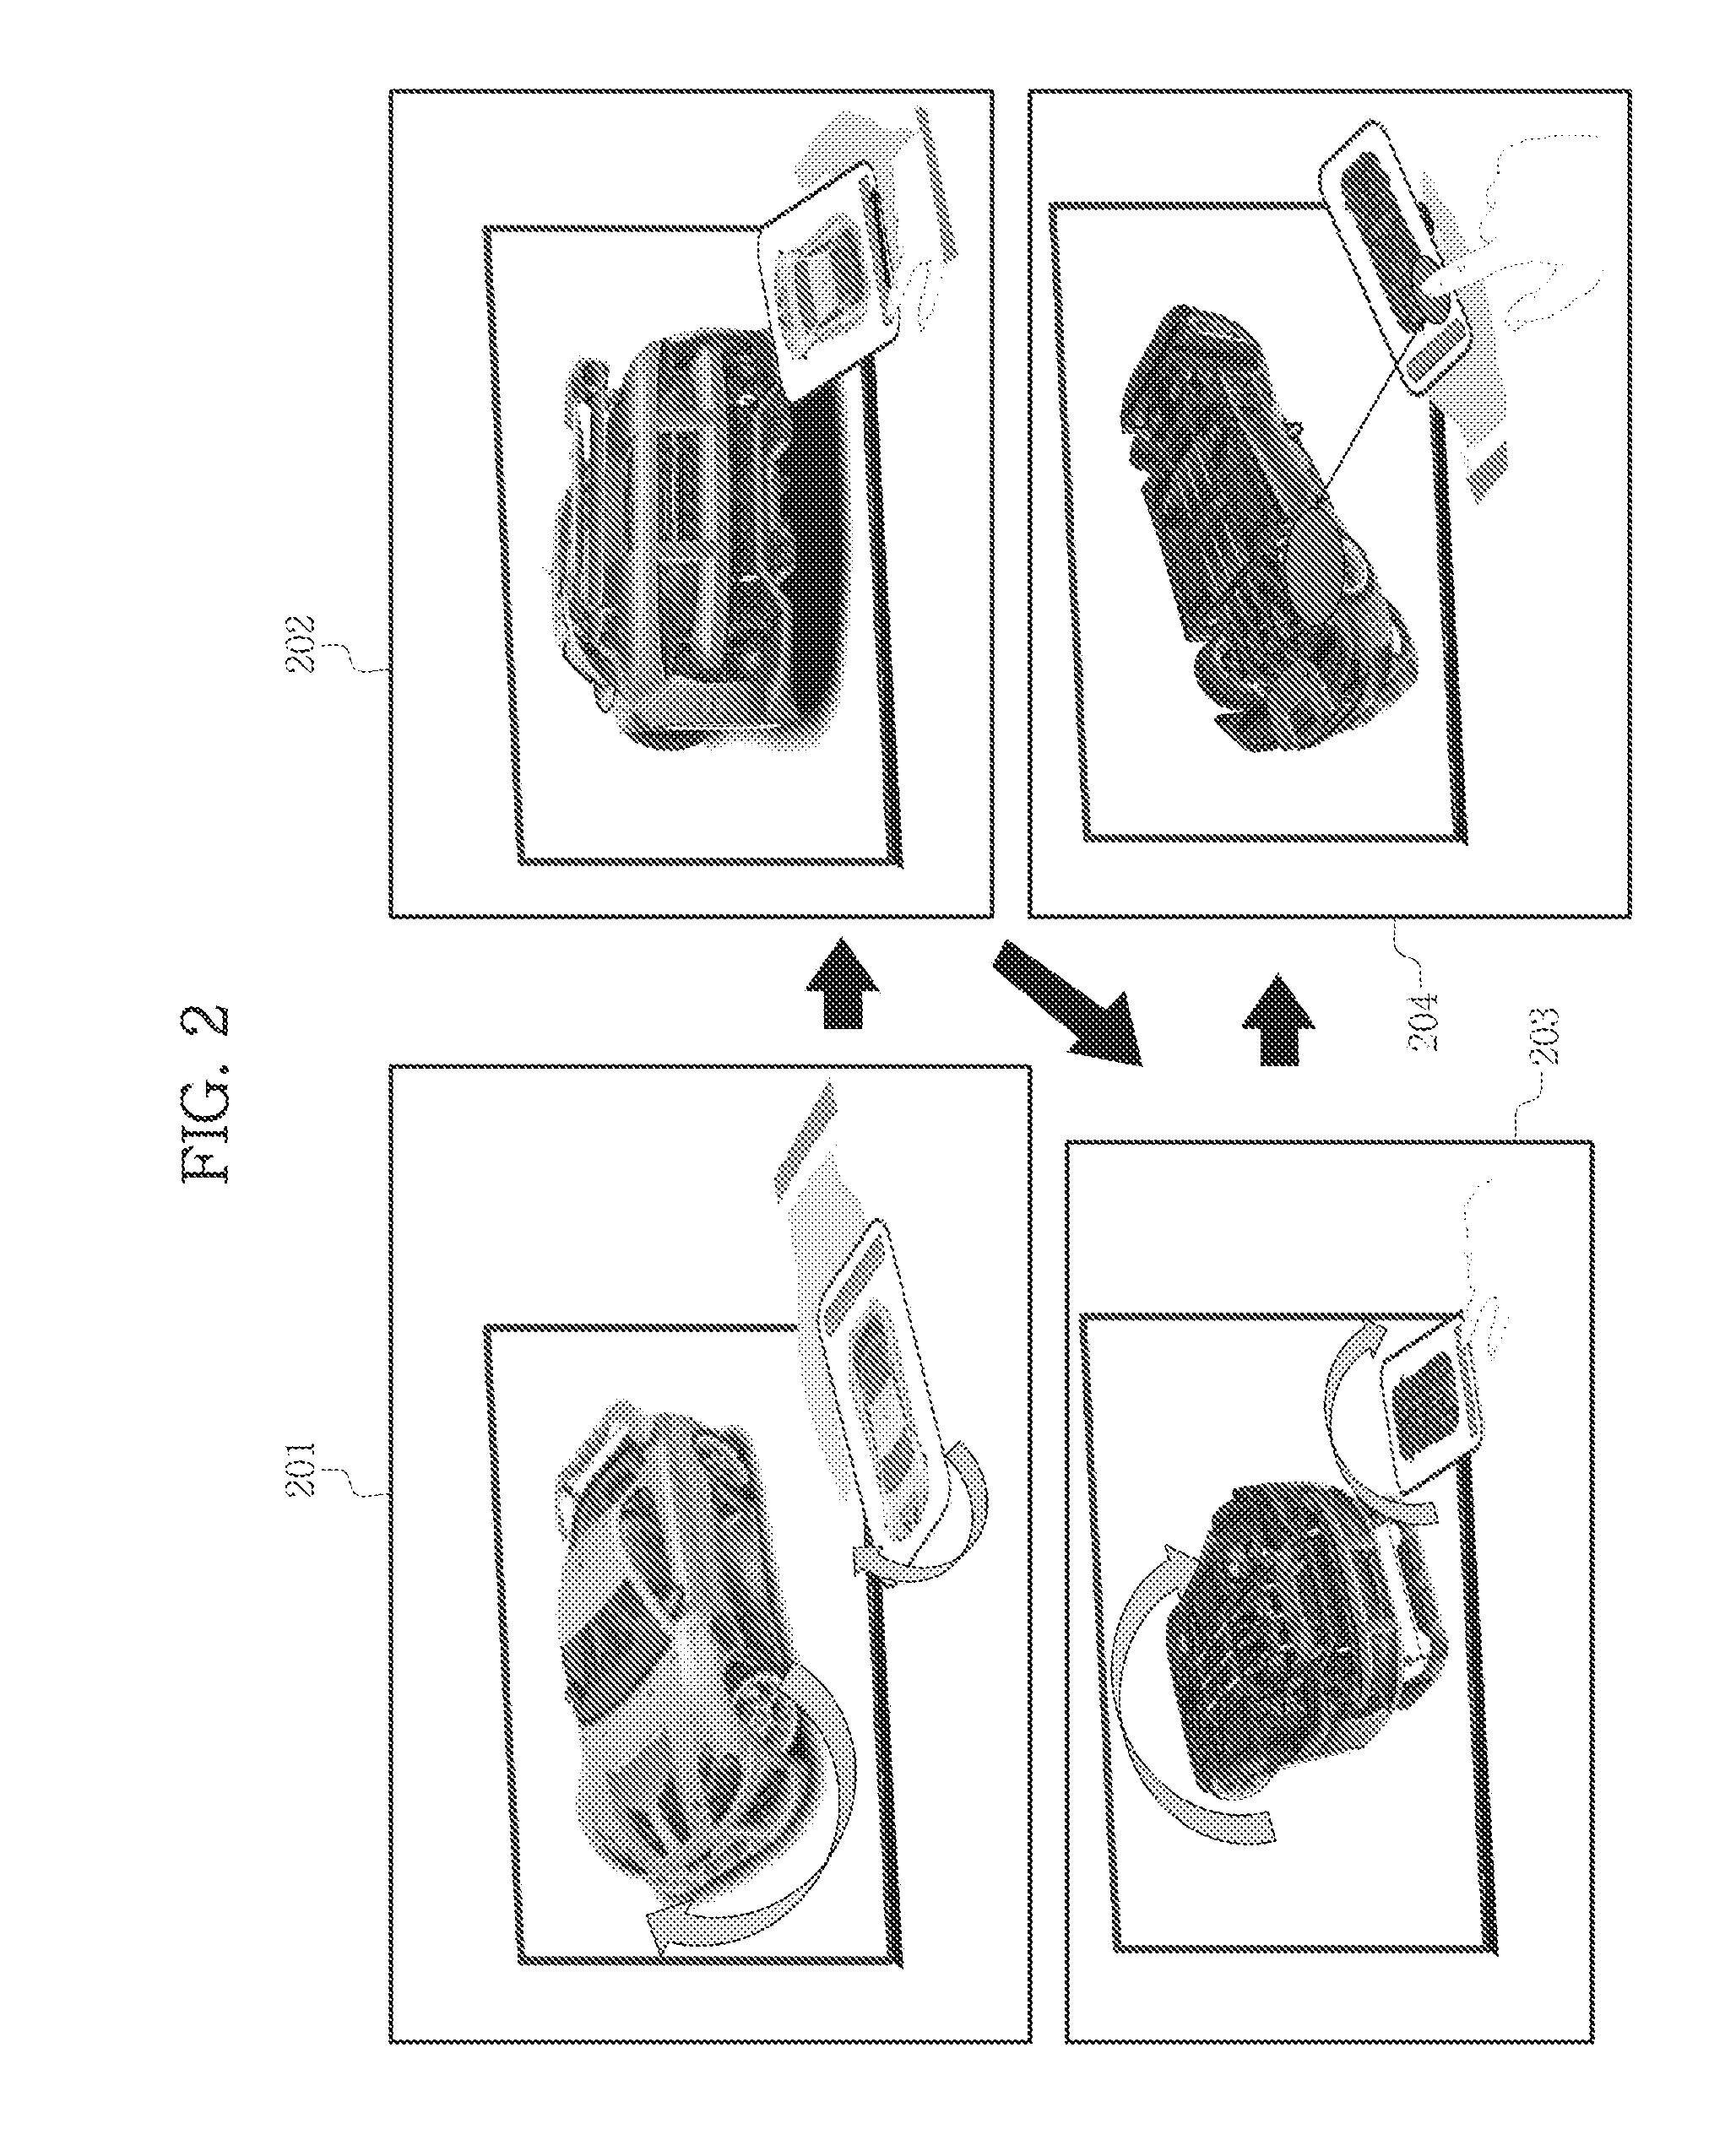 Apparatus and method for manipulating image